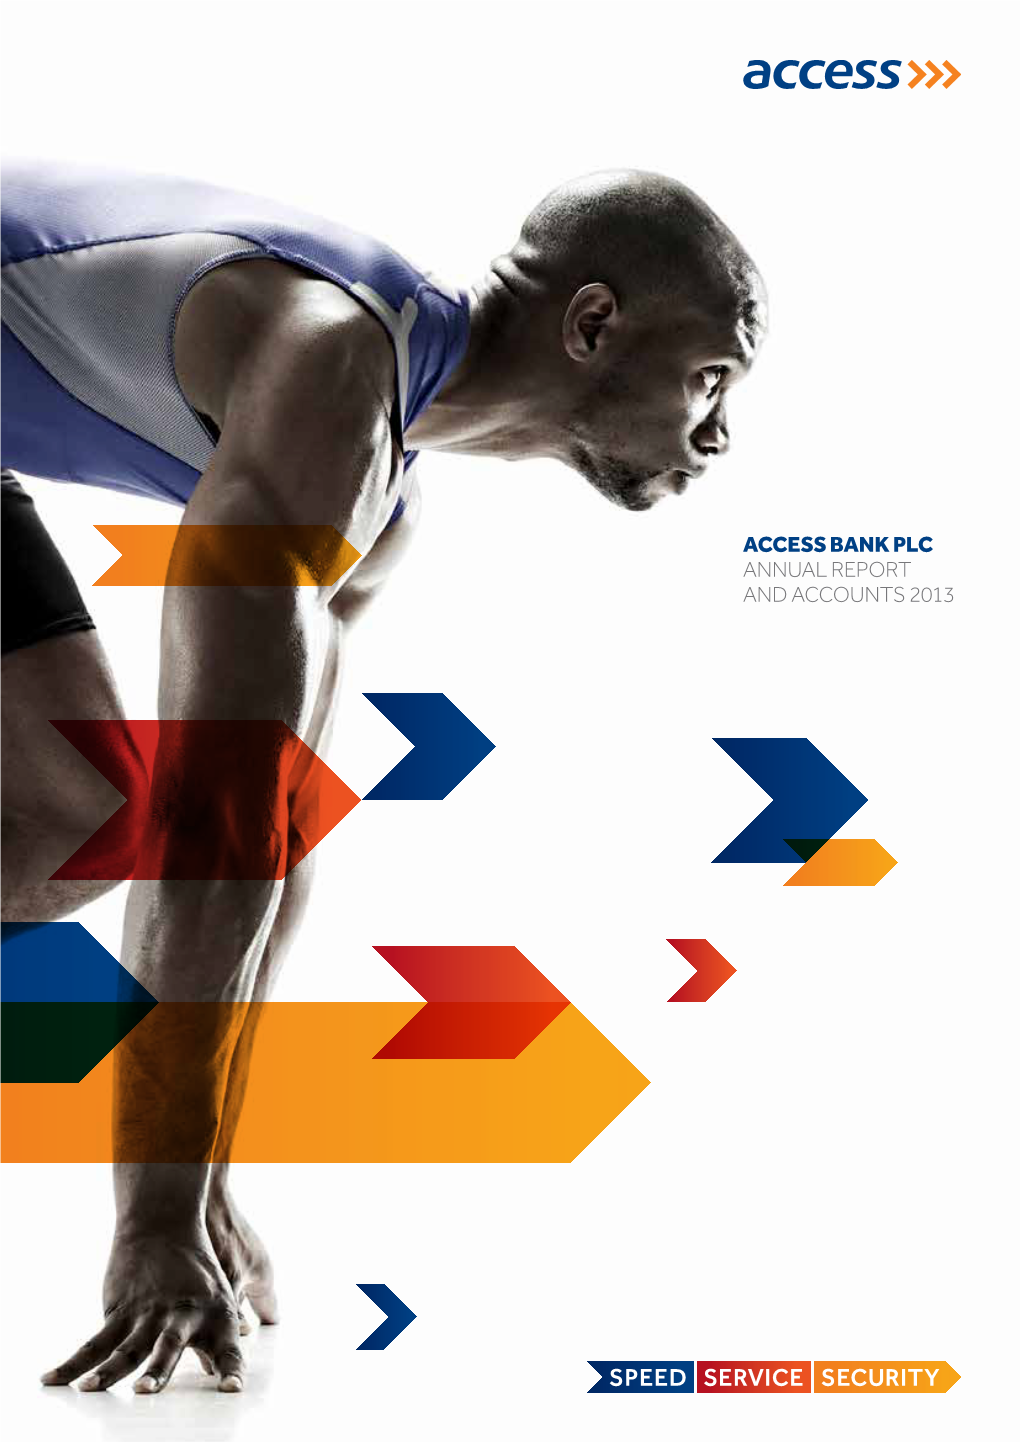 Access Bank Plc Annual Report and Accounts 2013 Contents